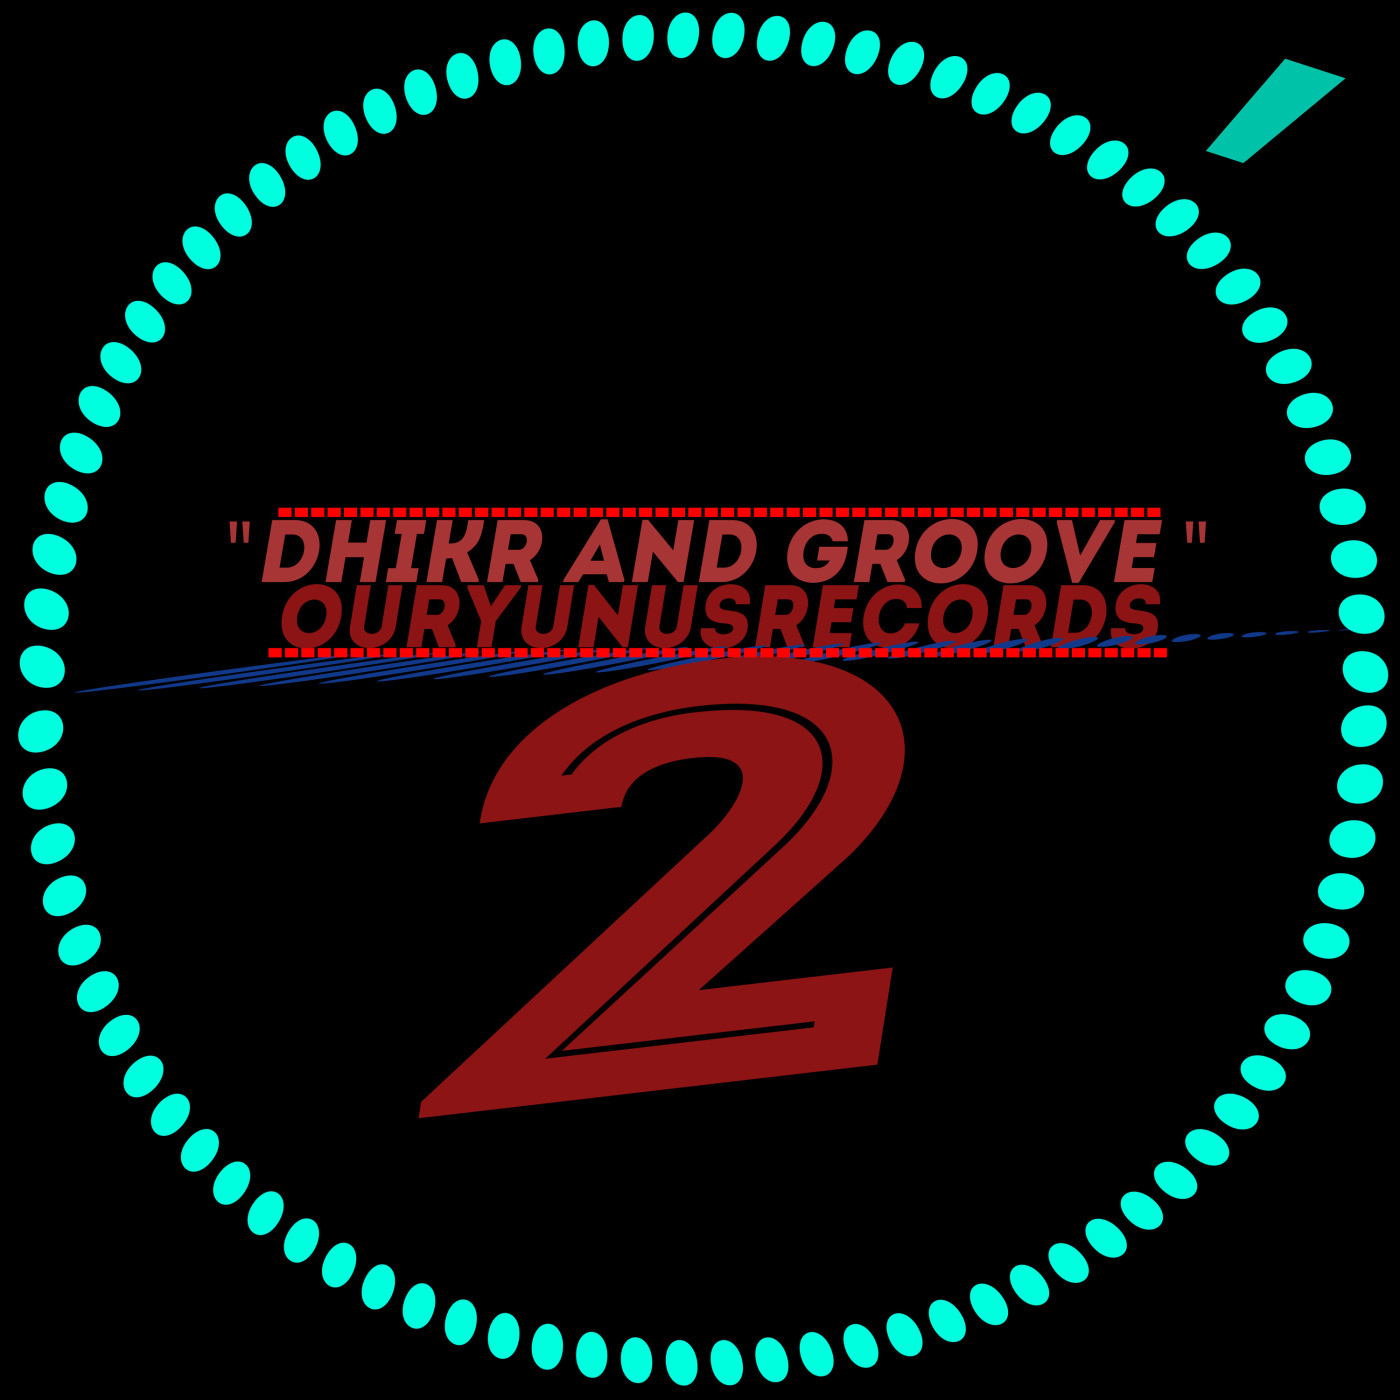 Jonasclean - Dhikr and Groove 2 / Our Yunus Records